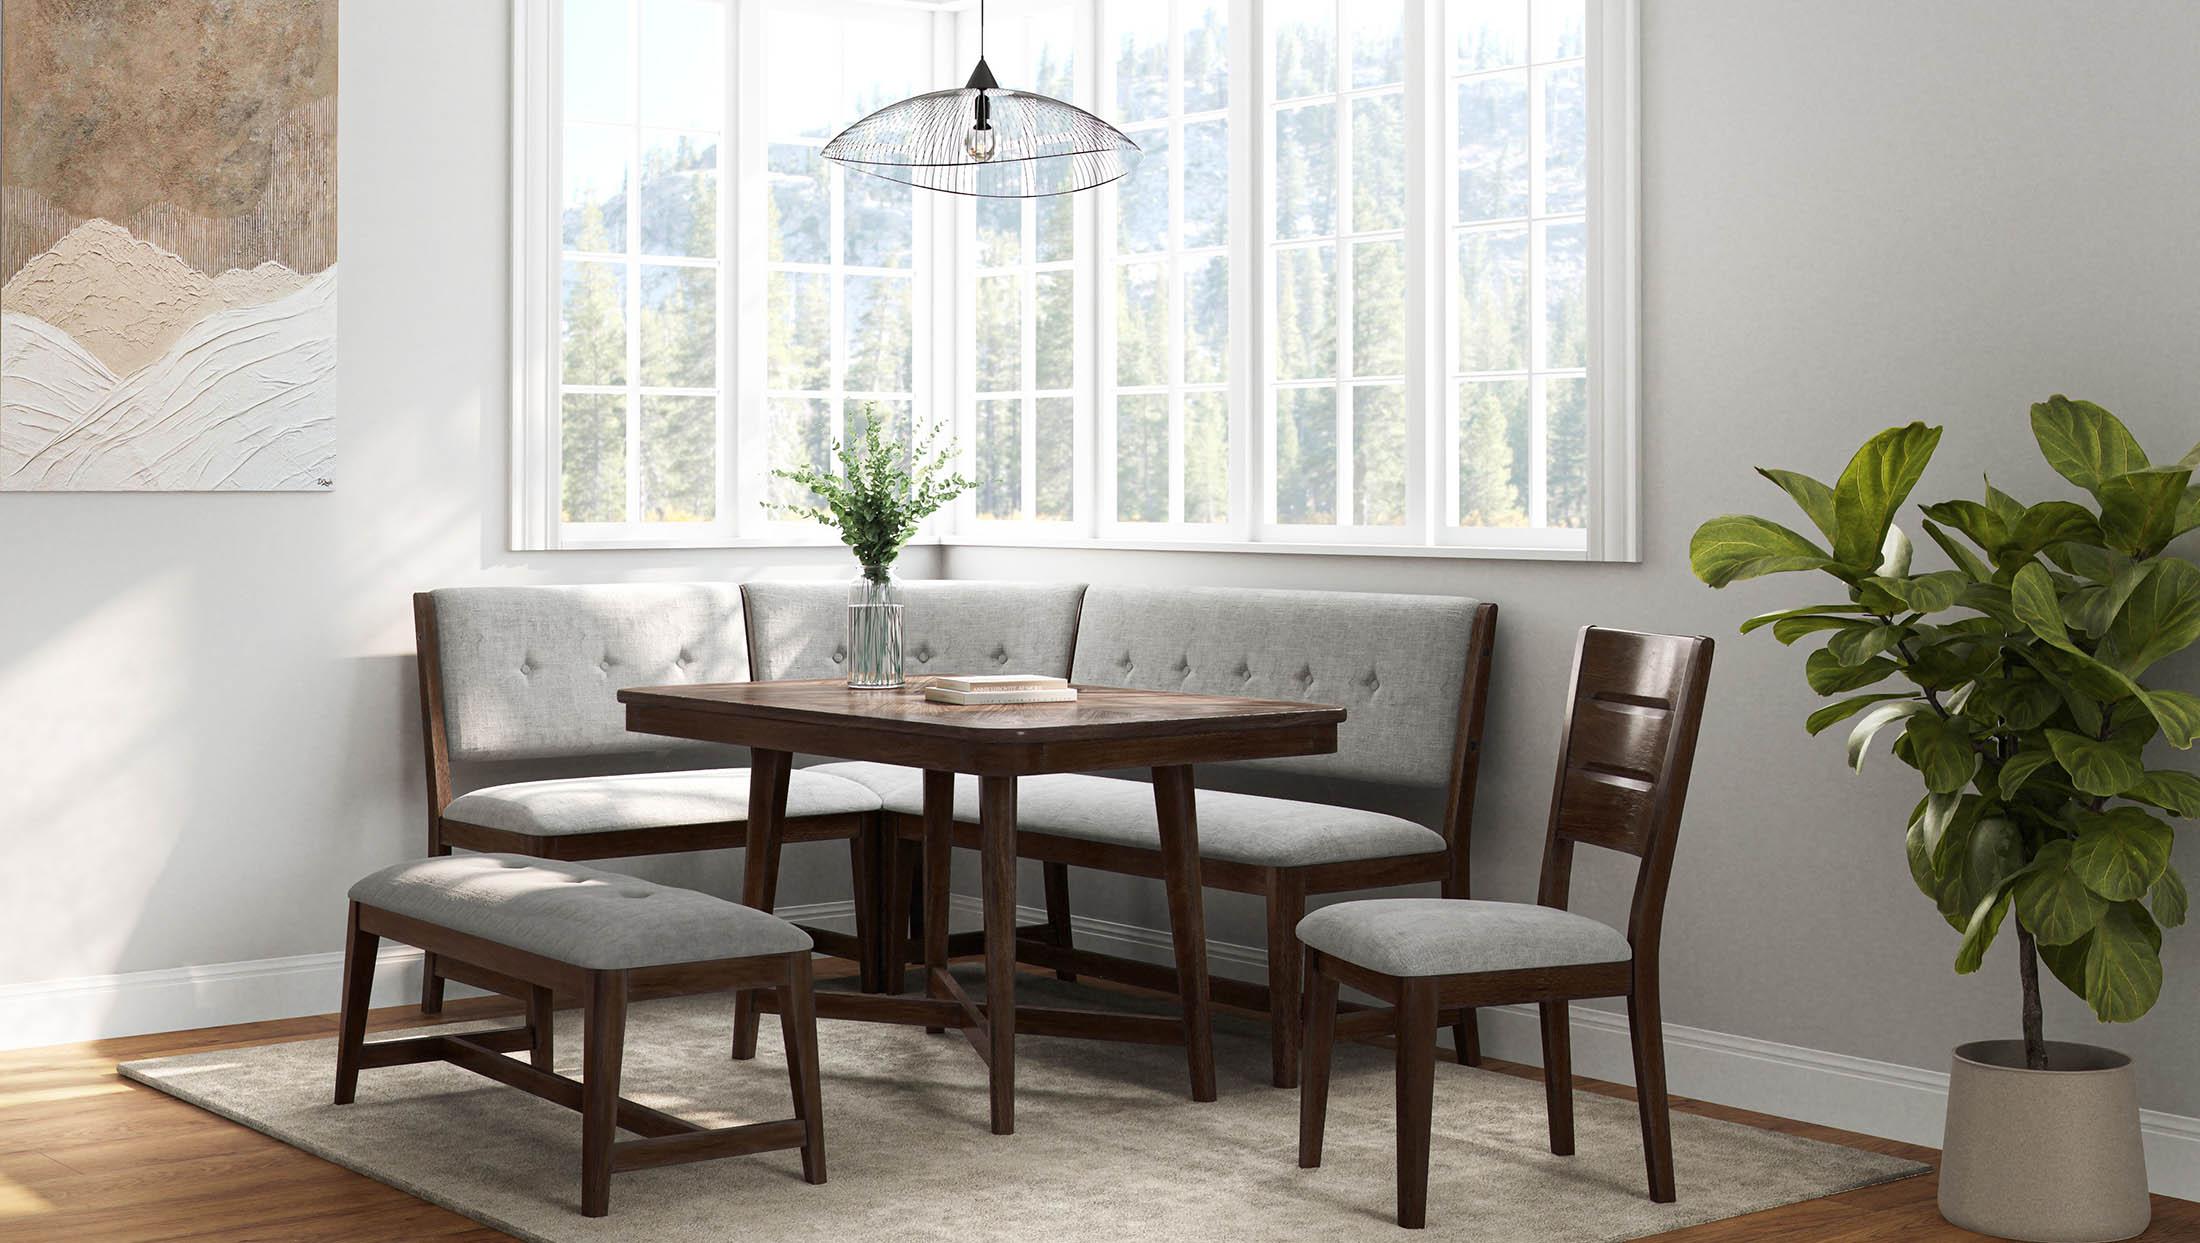 Modern Dining Table Set DORVAL 8540-500-Set-4 8540-500-Set-4 in Brown Fabric